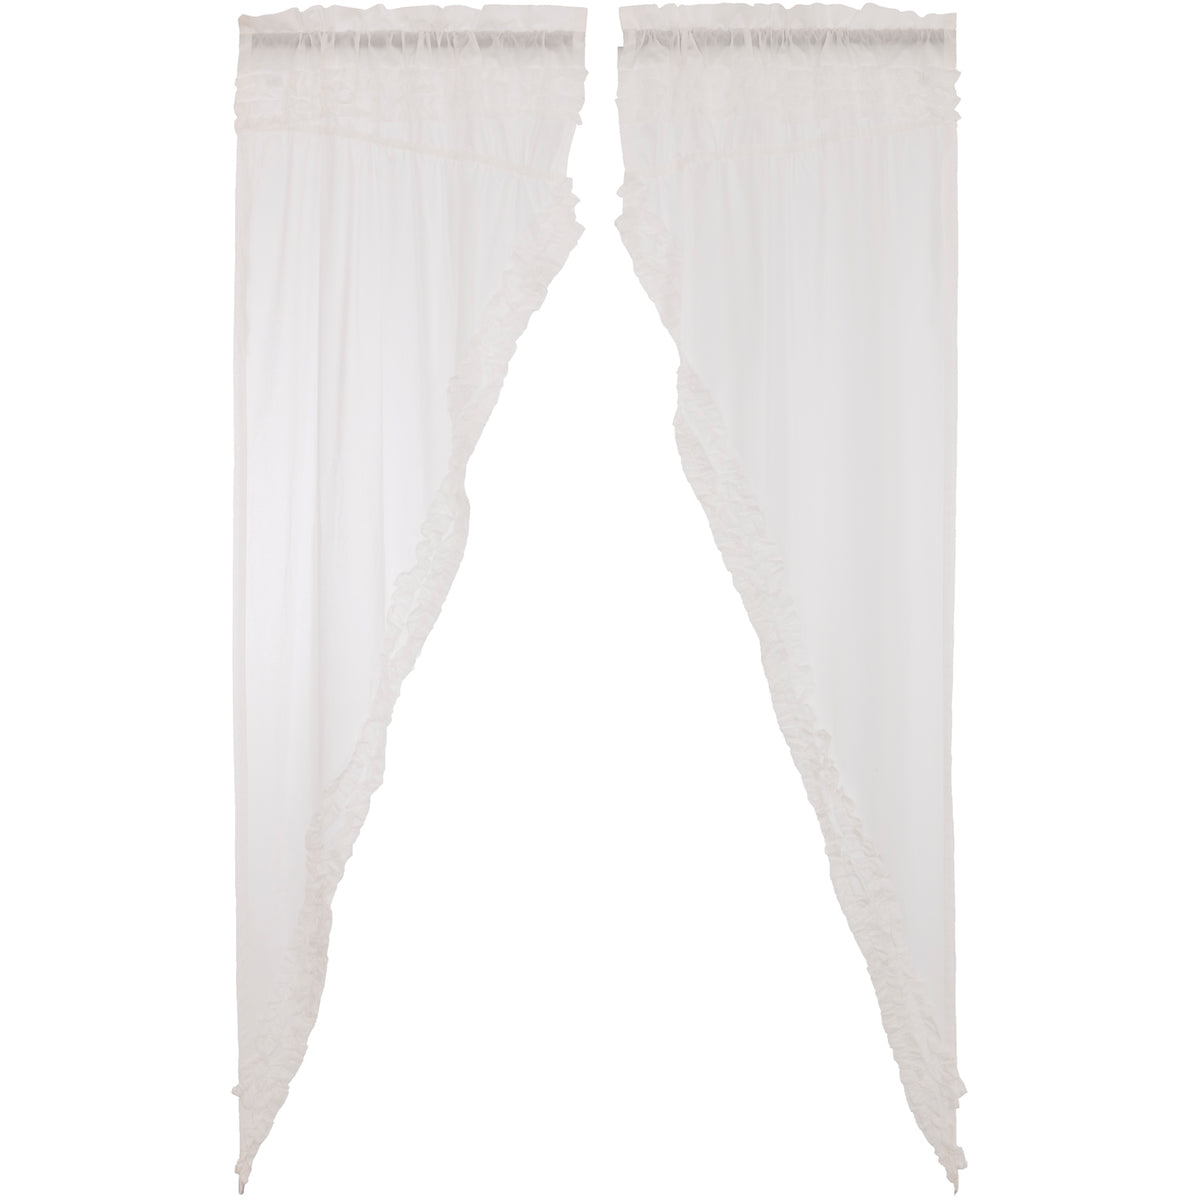 April & Olive White Ruffled Sheer Petticoat Prairie Long Panel Set of 2 84x36x18 By VHC Brands